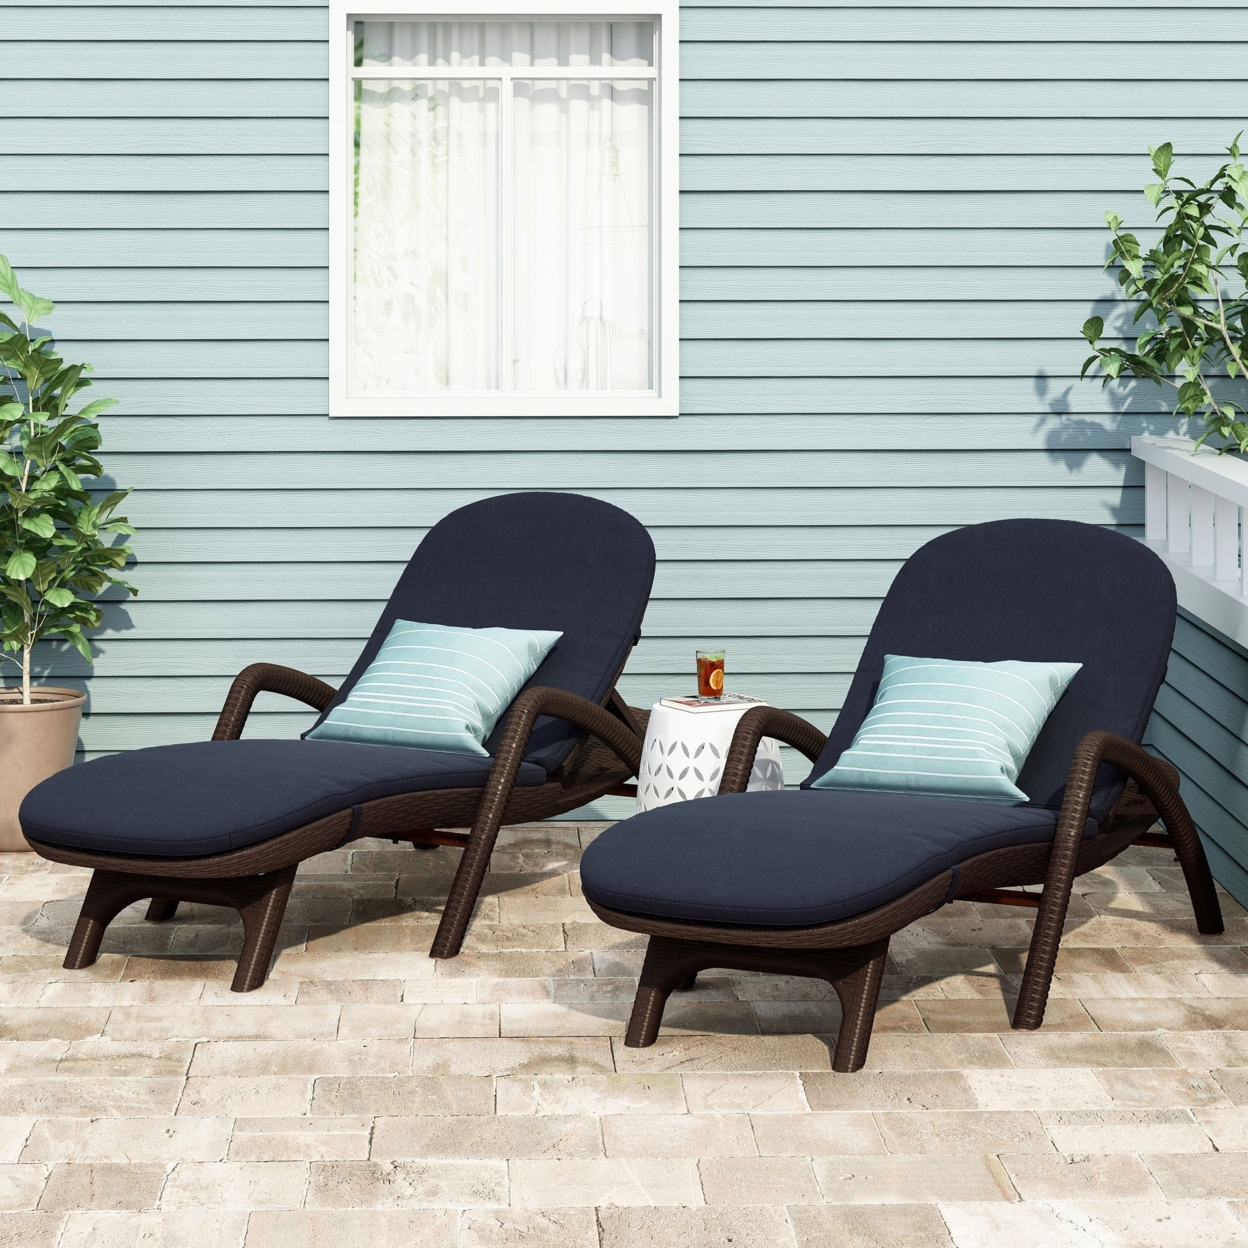 Riley Outdoor Faux Wicker Chaise Lounges With Cushion (Set Of 2) - Dark Brown/beige